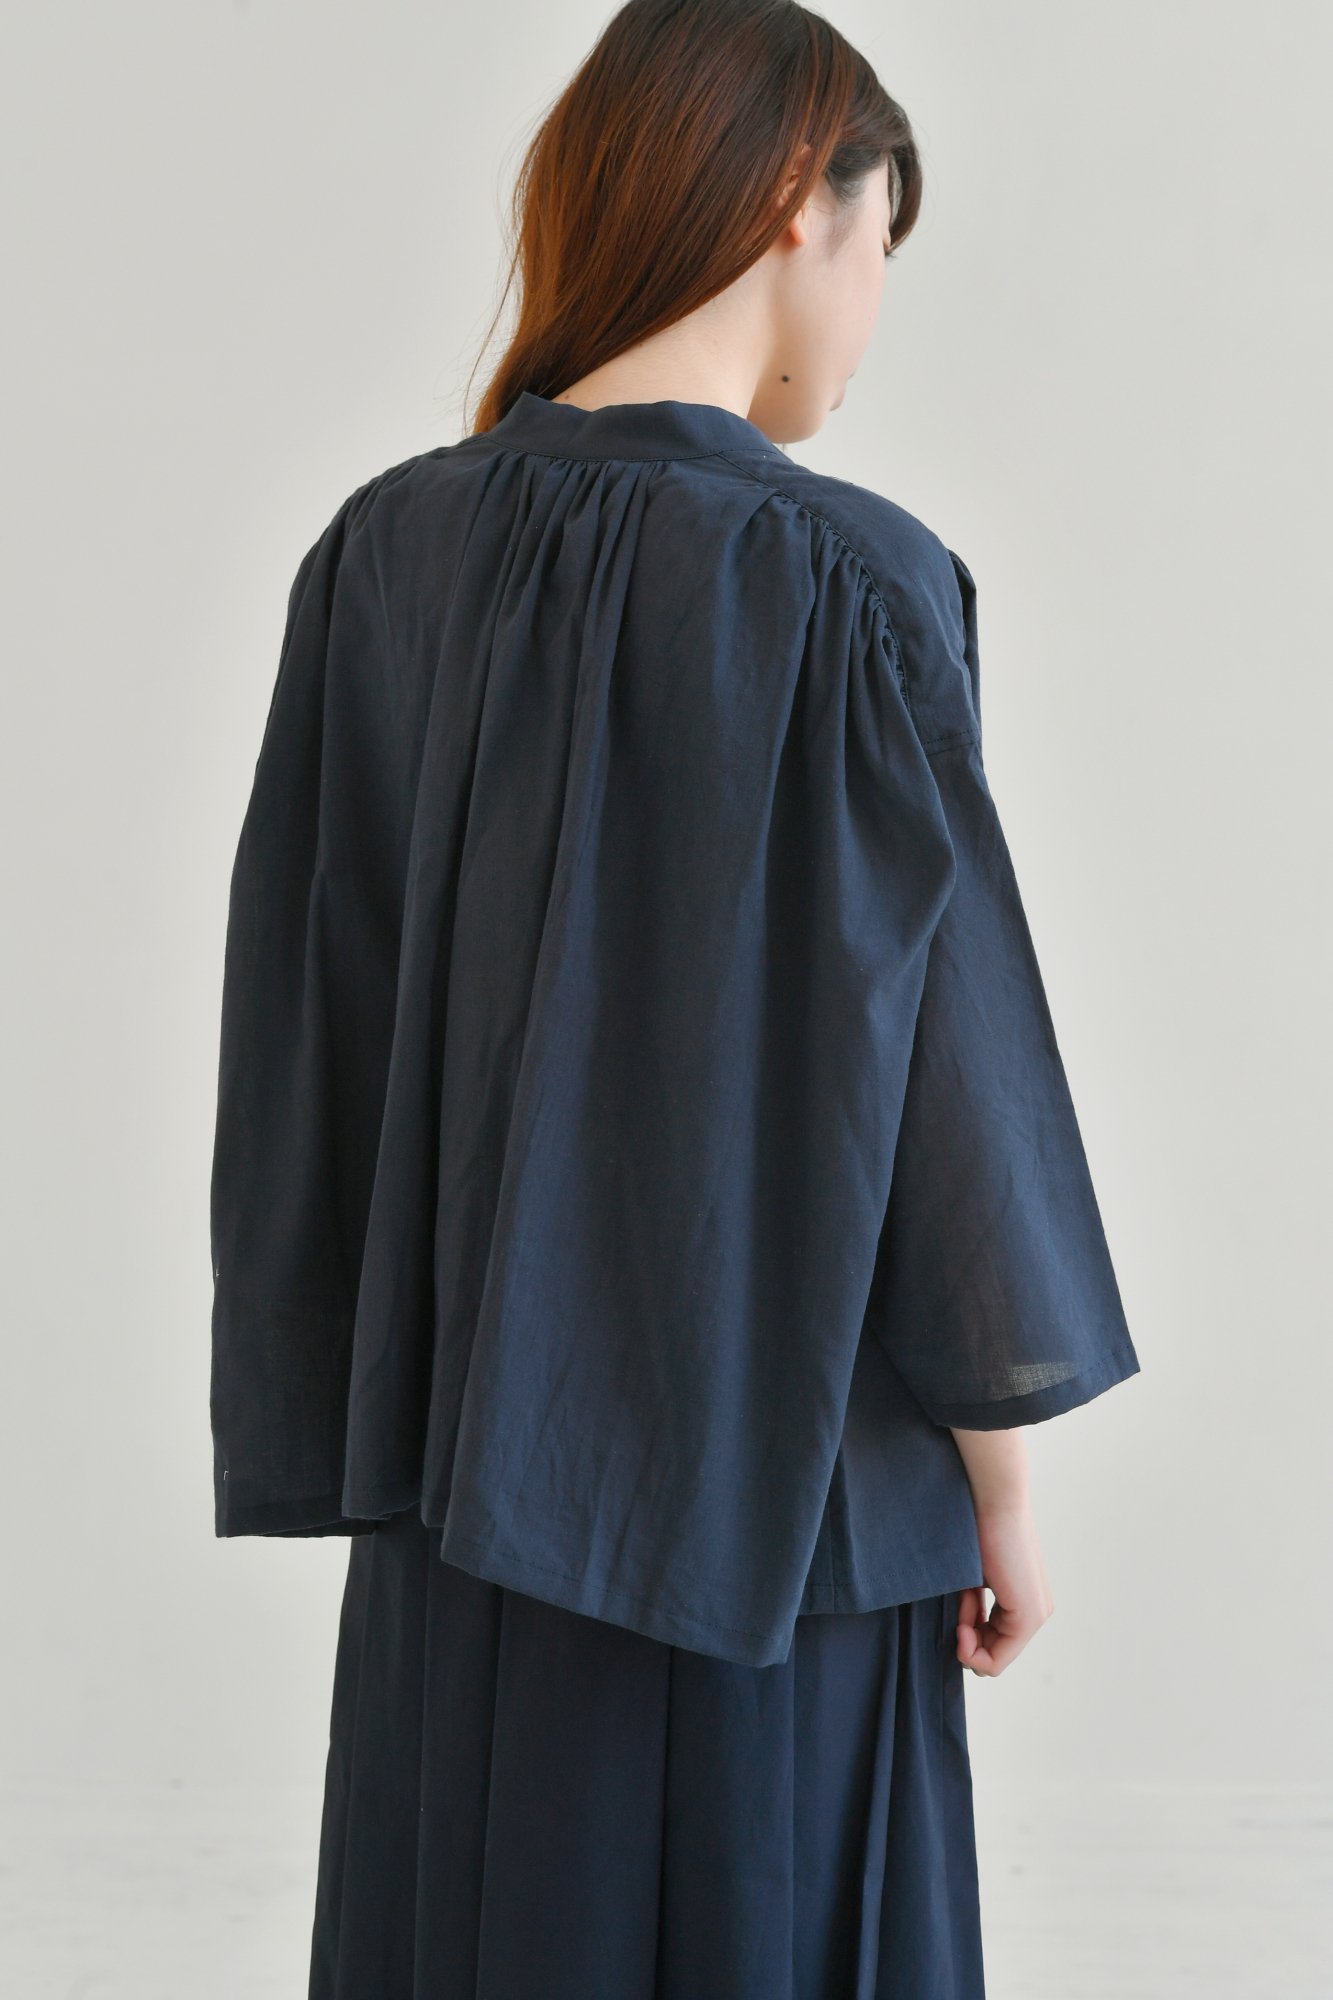 the last flower of the afternoon | 追懐のsmock blouse (black) | ブラウス